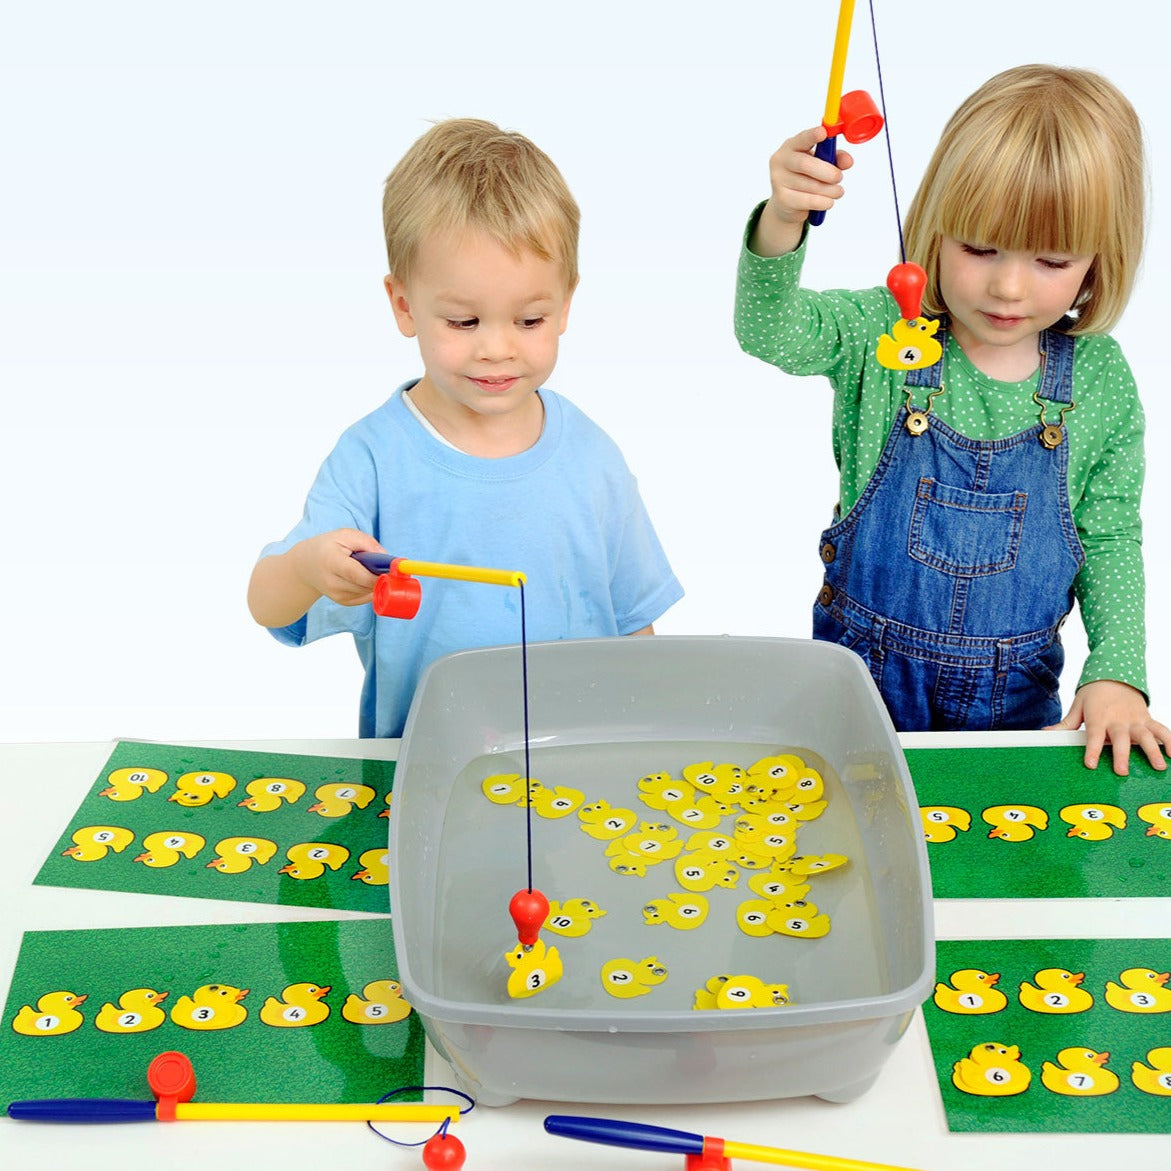 Magnetic Duck Fishing, Introducing our fun and educational Magnetic Number Fishing Game! This game is perfect for both indoor and outdoor play as it can be used in a water tray or on a tabletop. It comes with 4 waterproof double-sided play boards that provide 2 levels of play suitable for up to 4 players.The Magnetic Fishing Rods are designed to easily pick up the ducks from the water or sand as they have ferritic stainless steel parts that won't rust. Each duck has a number printed on both sides, ranging f